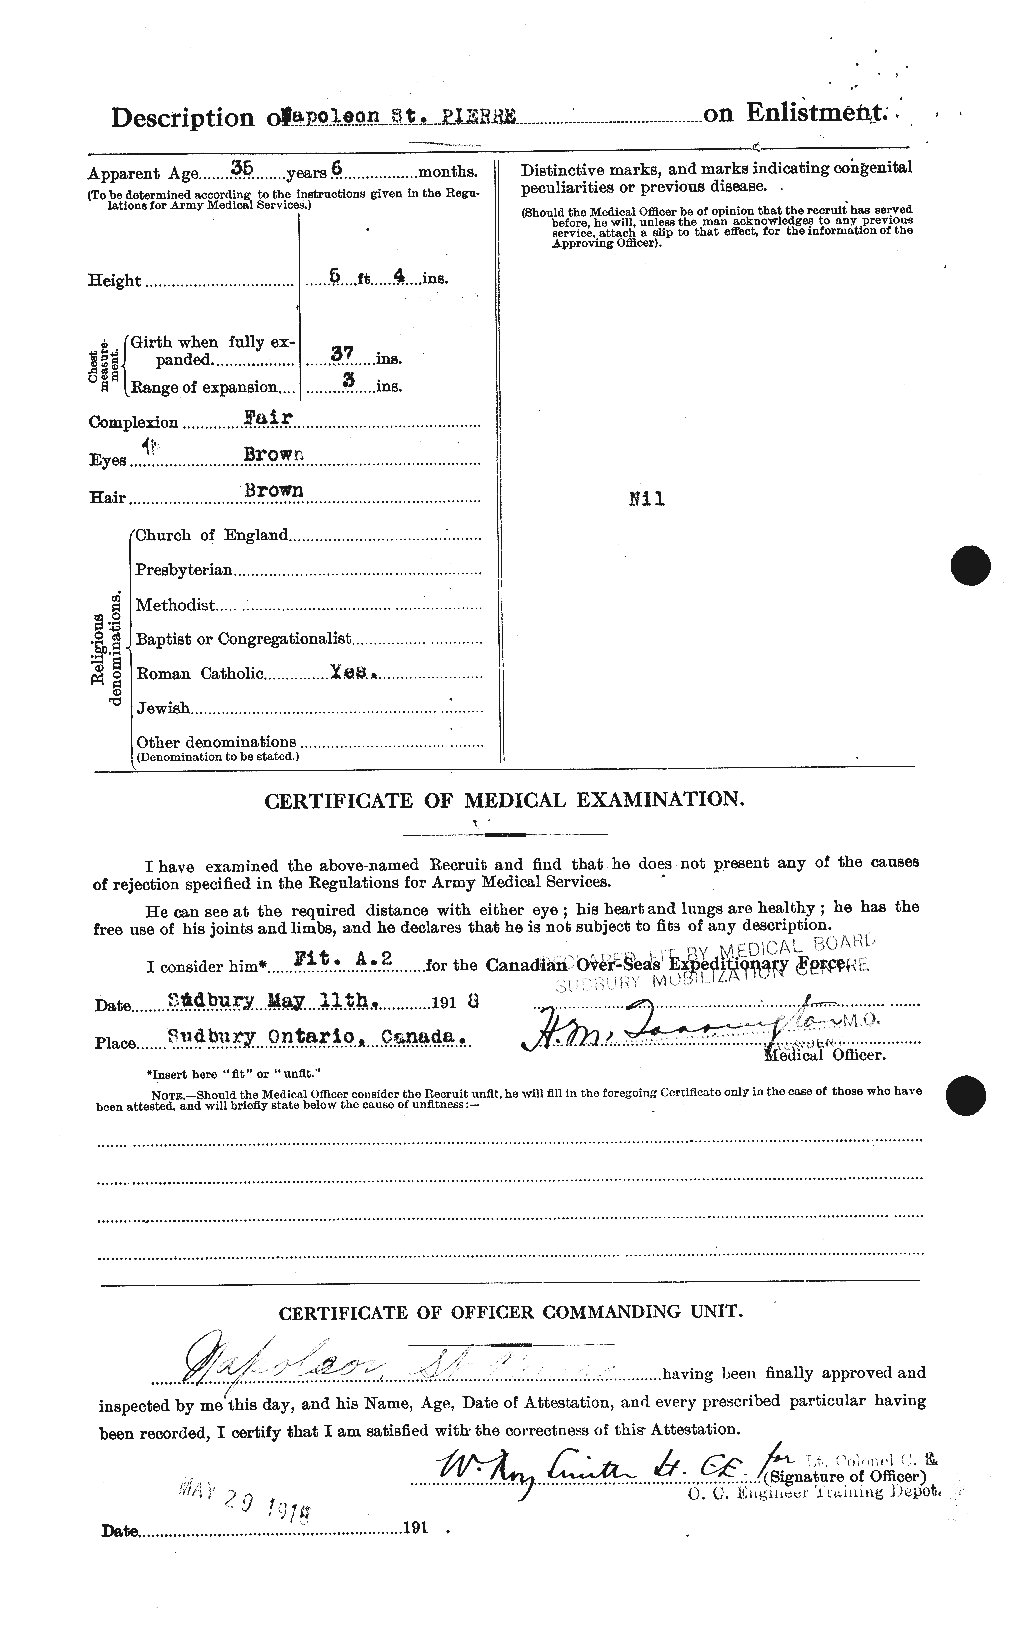 Personnel Records of the First World War - CEF 077583b